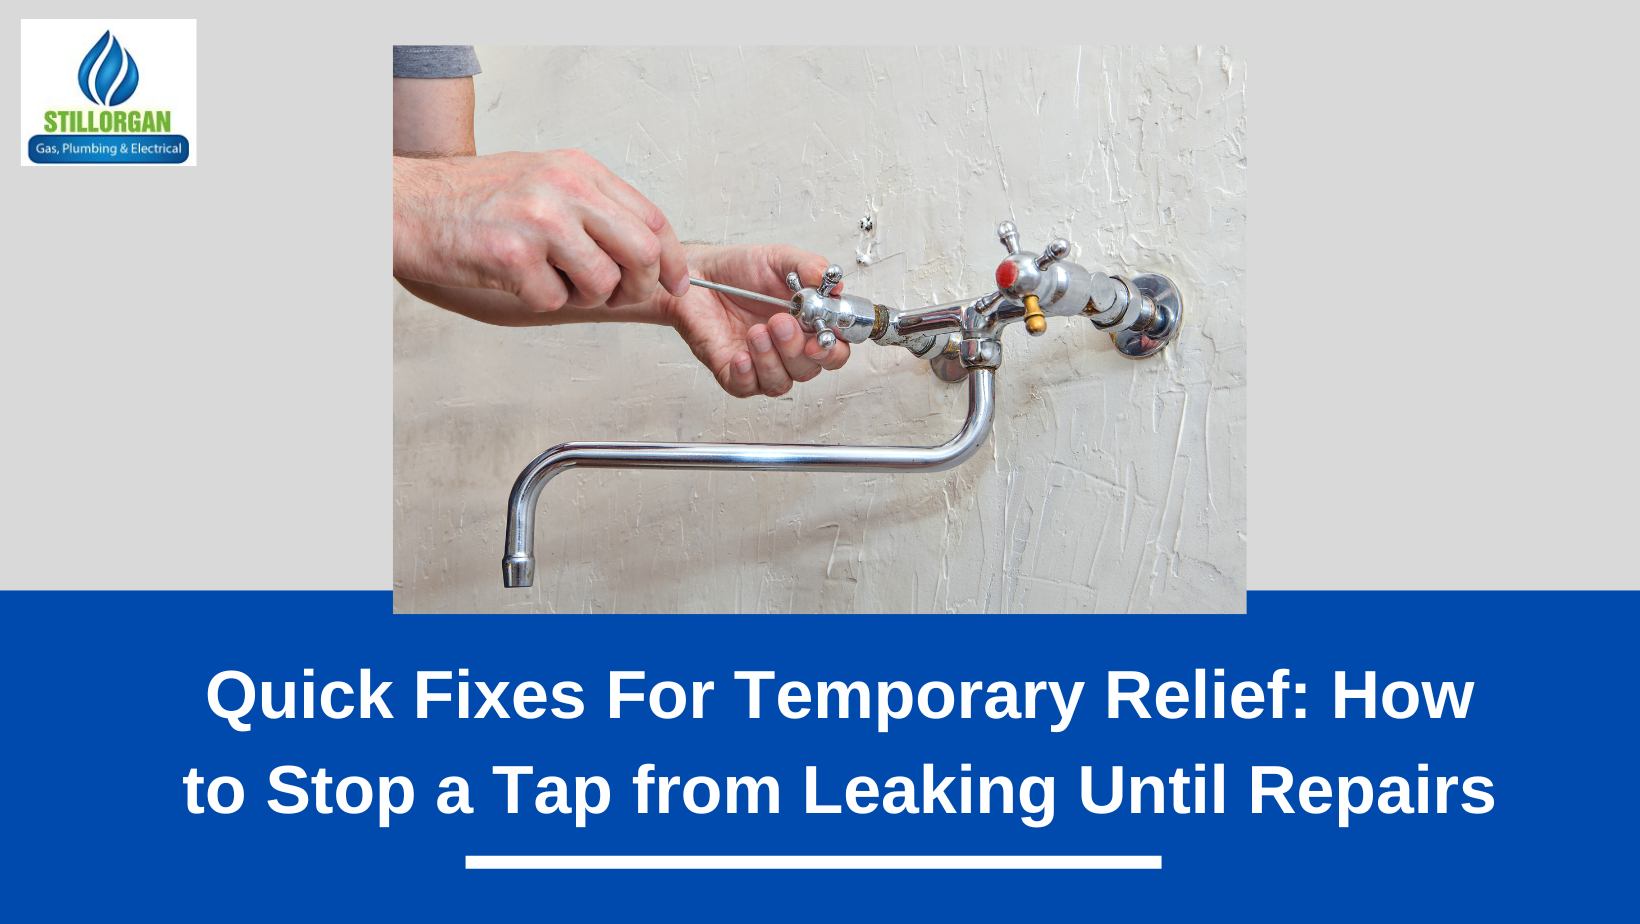 How to Stop a Tap from Leaking Until Repairs